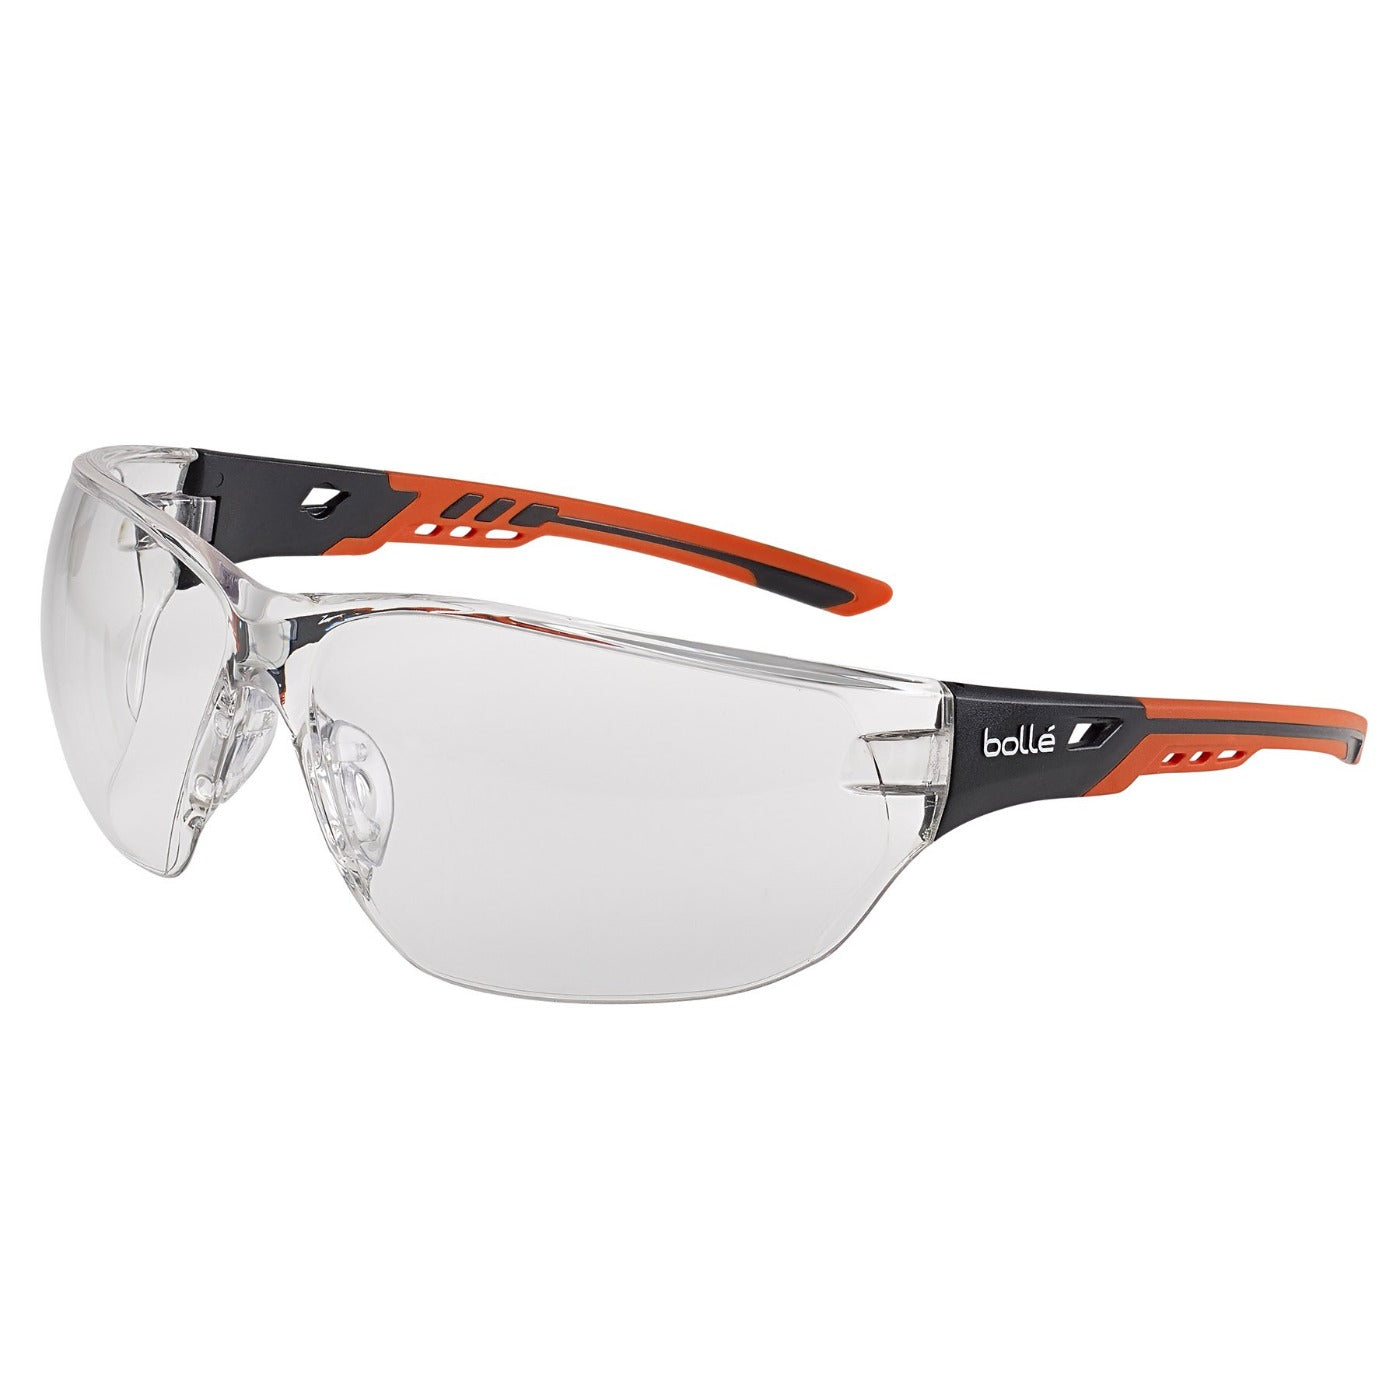 Bolle safety glasses Ness + clear Lens